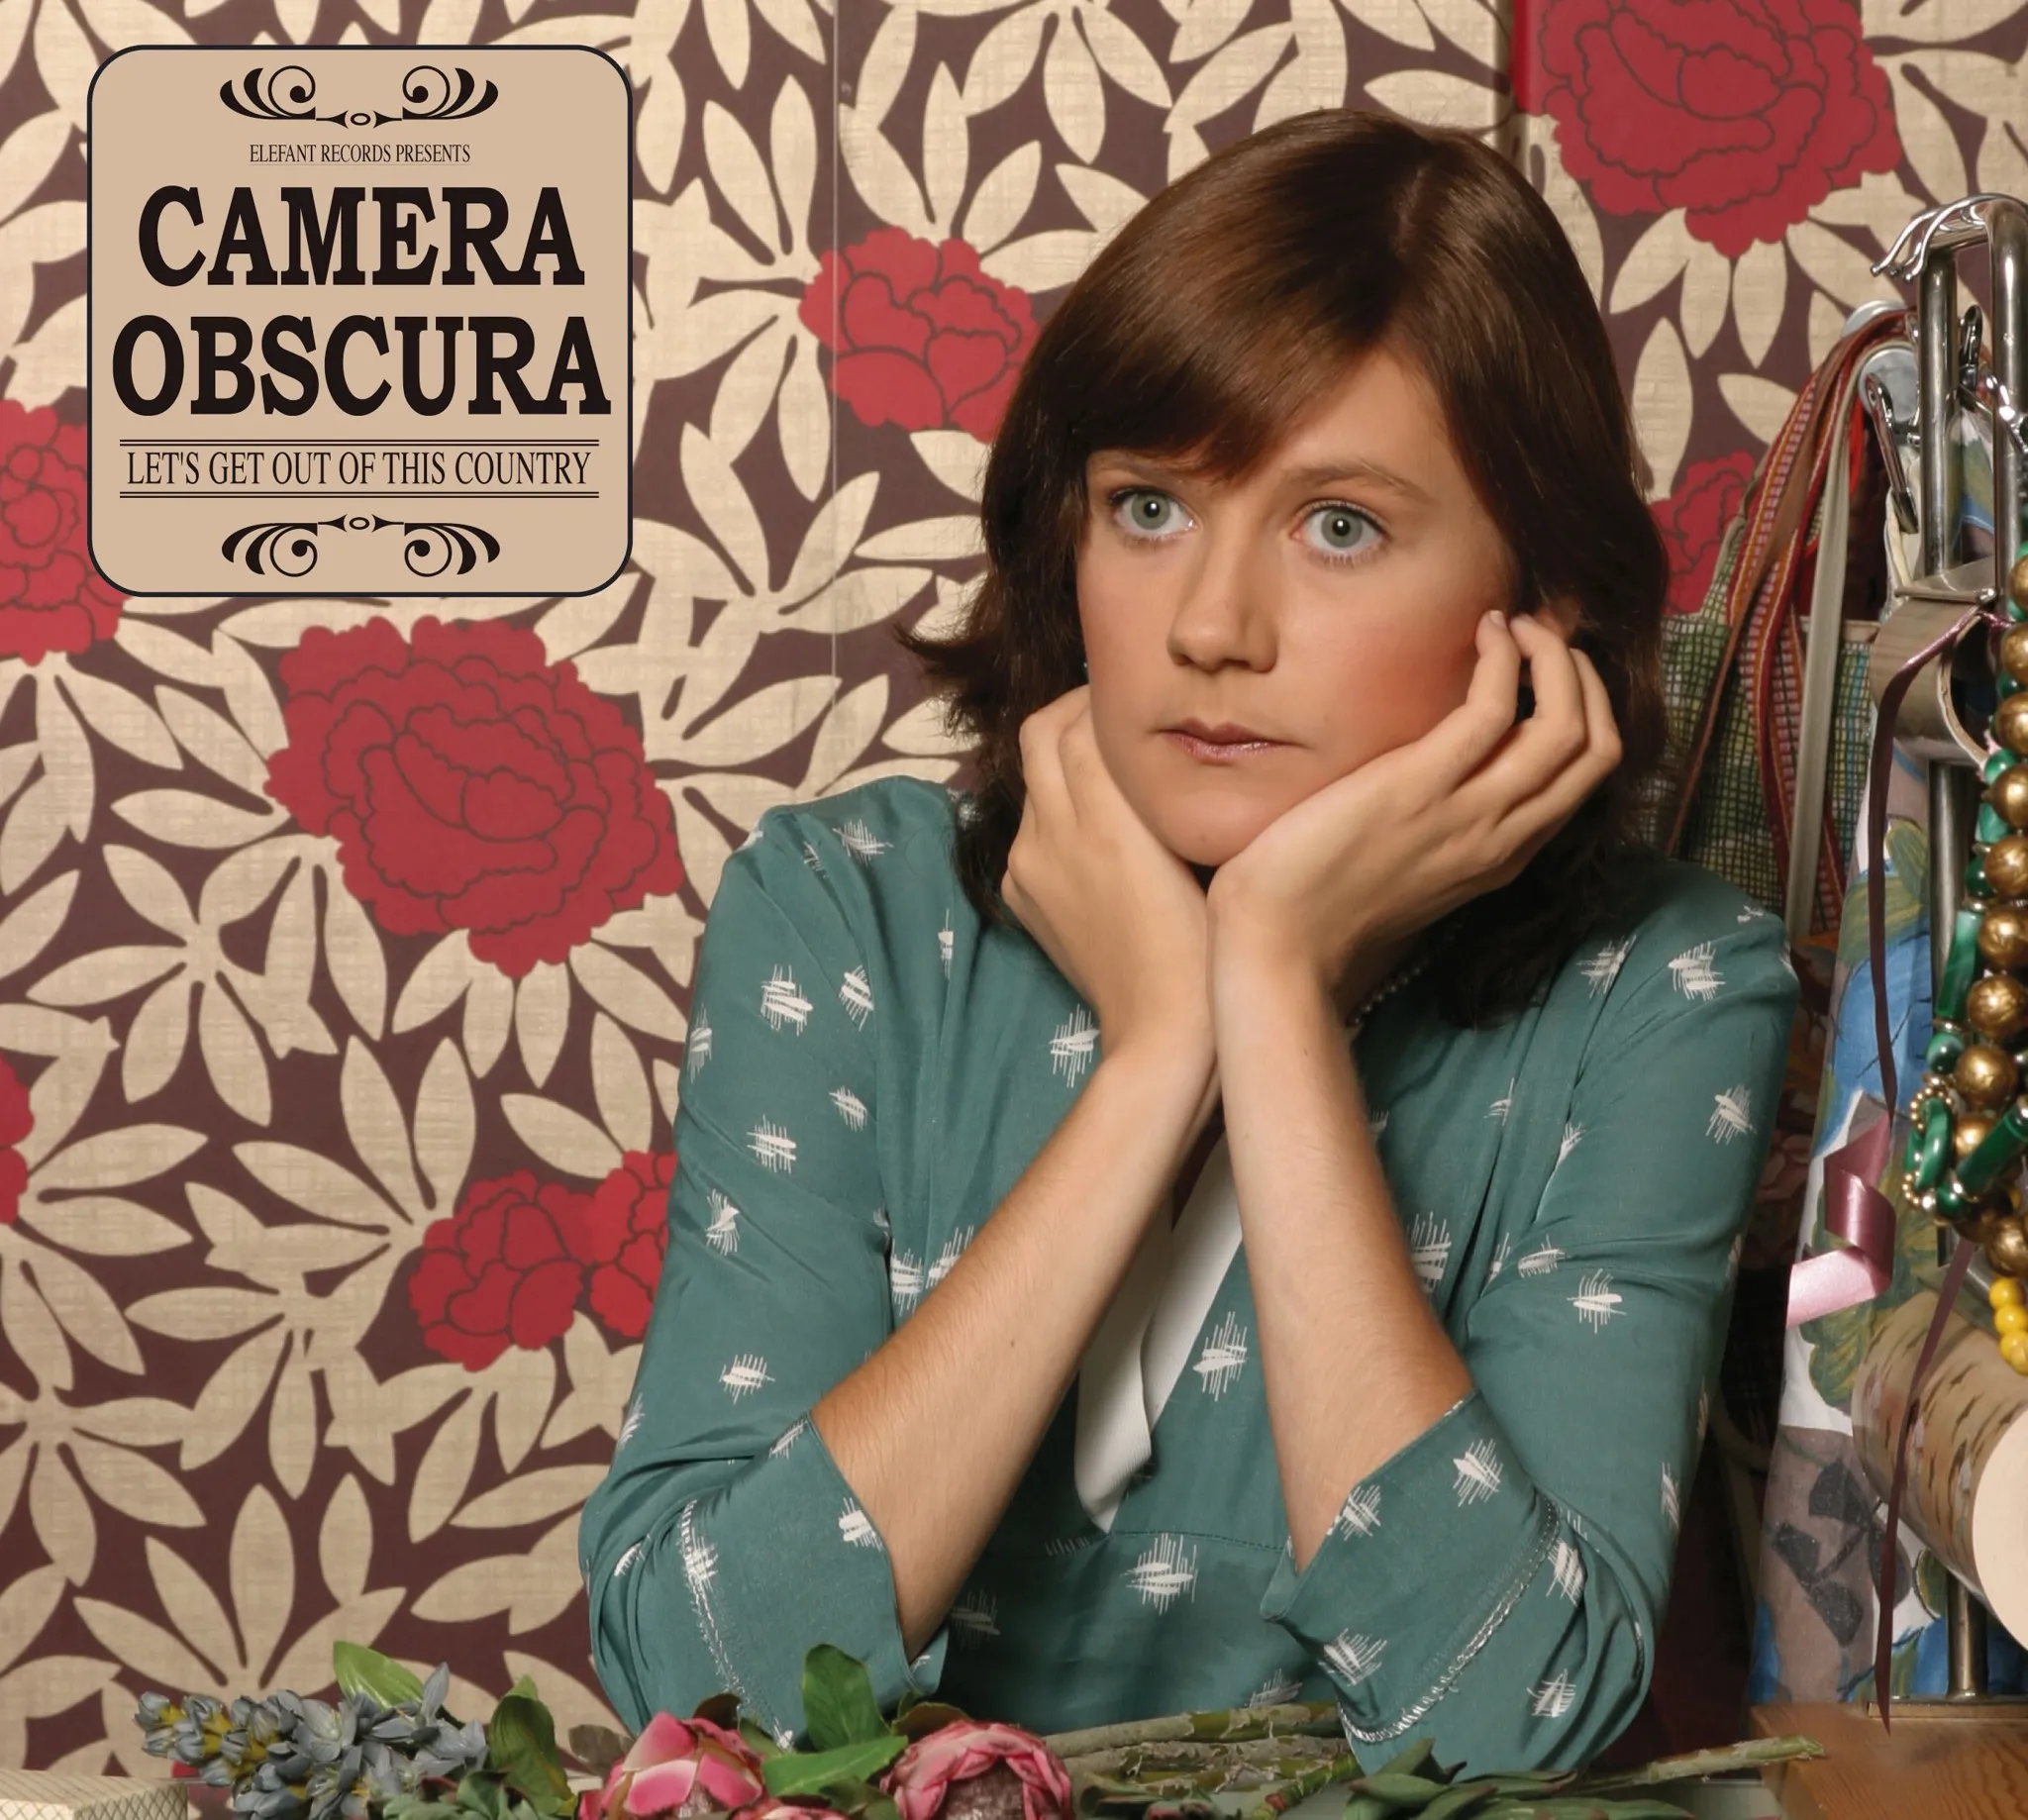 <strong>Camera Obscura - Let's Get Out Of This Country</strong> (Vinyl LP - clear)